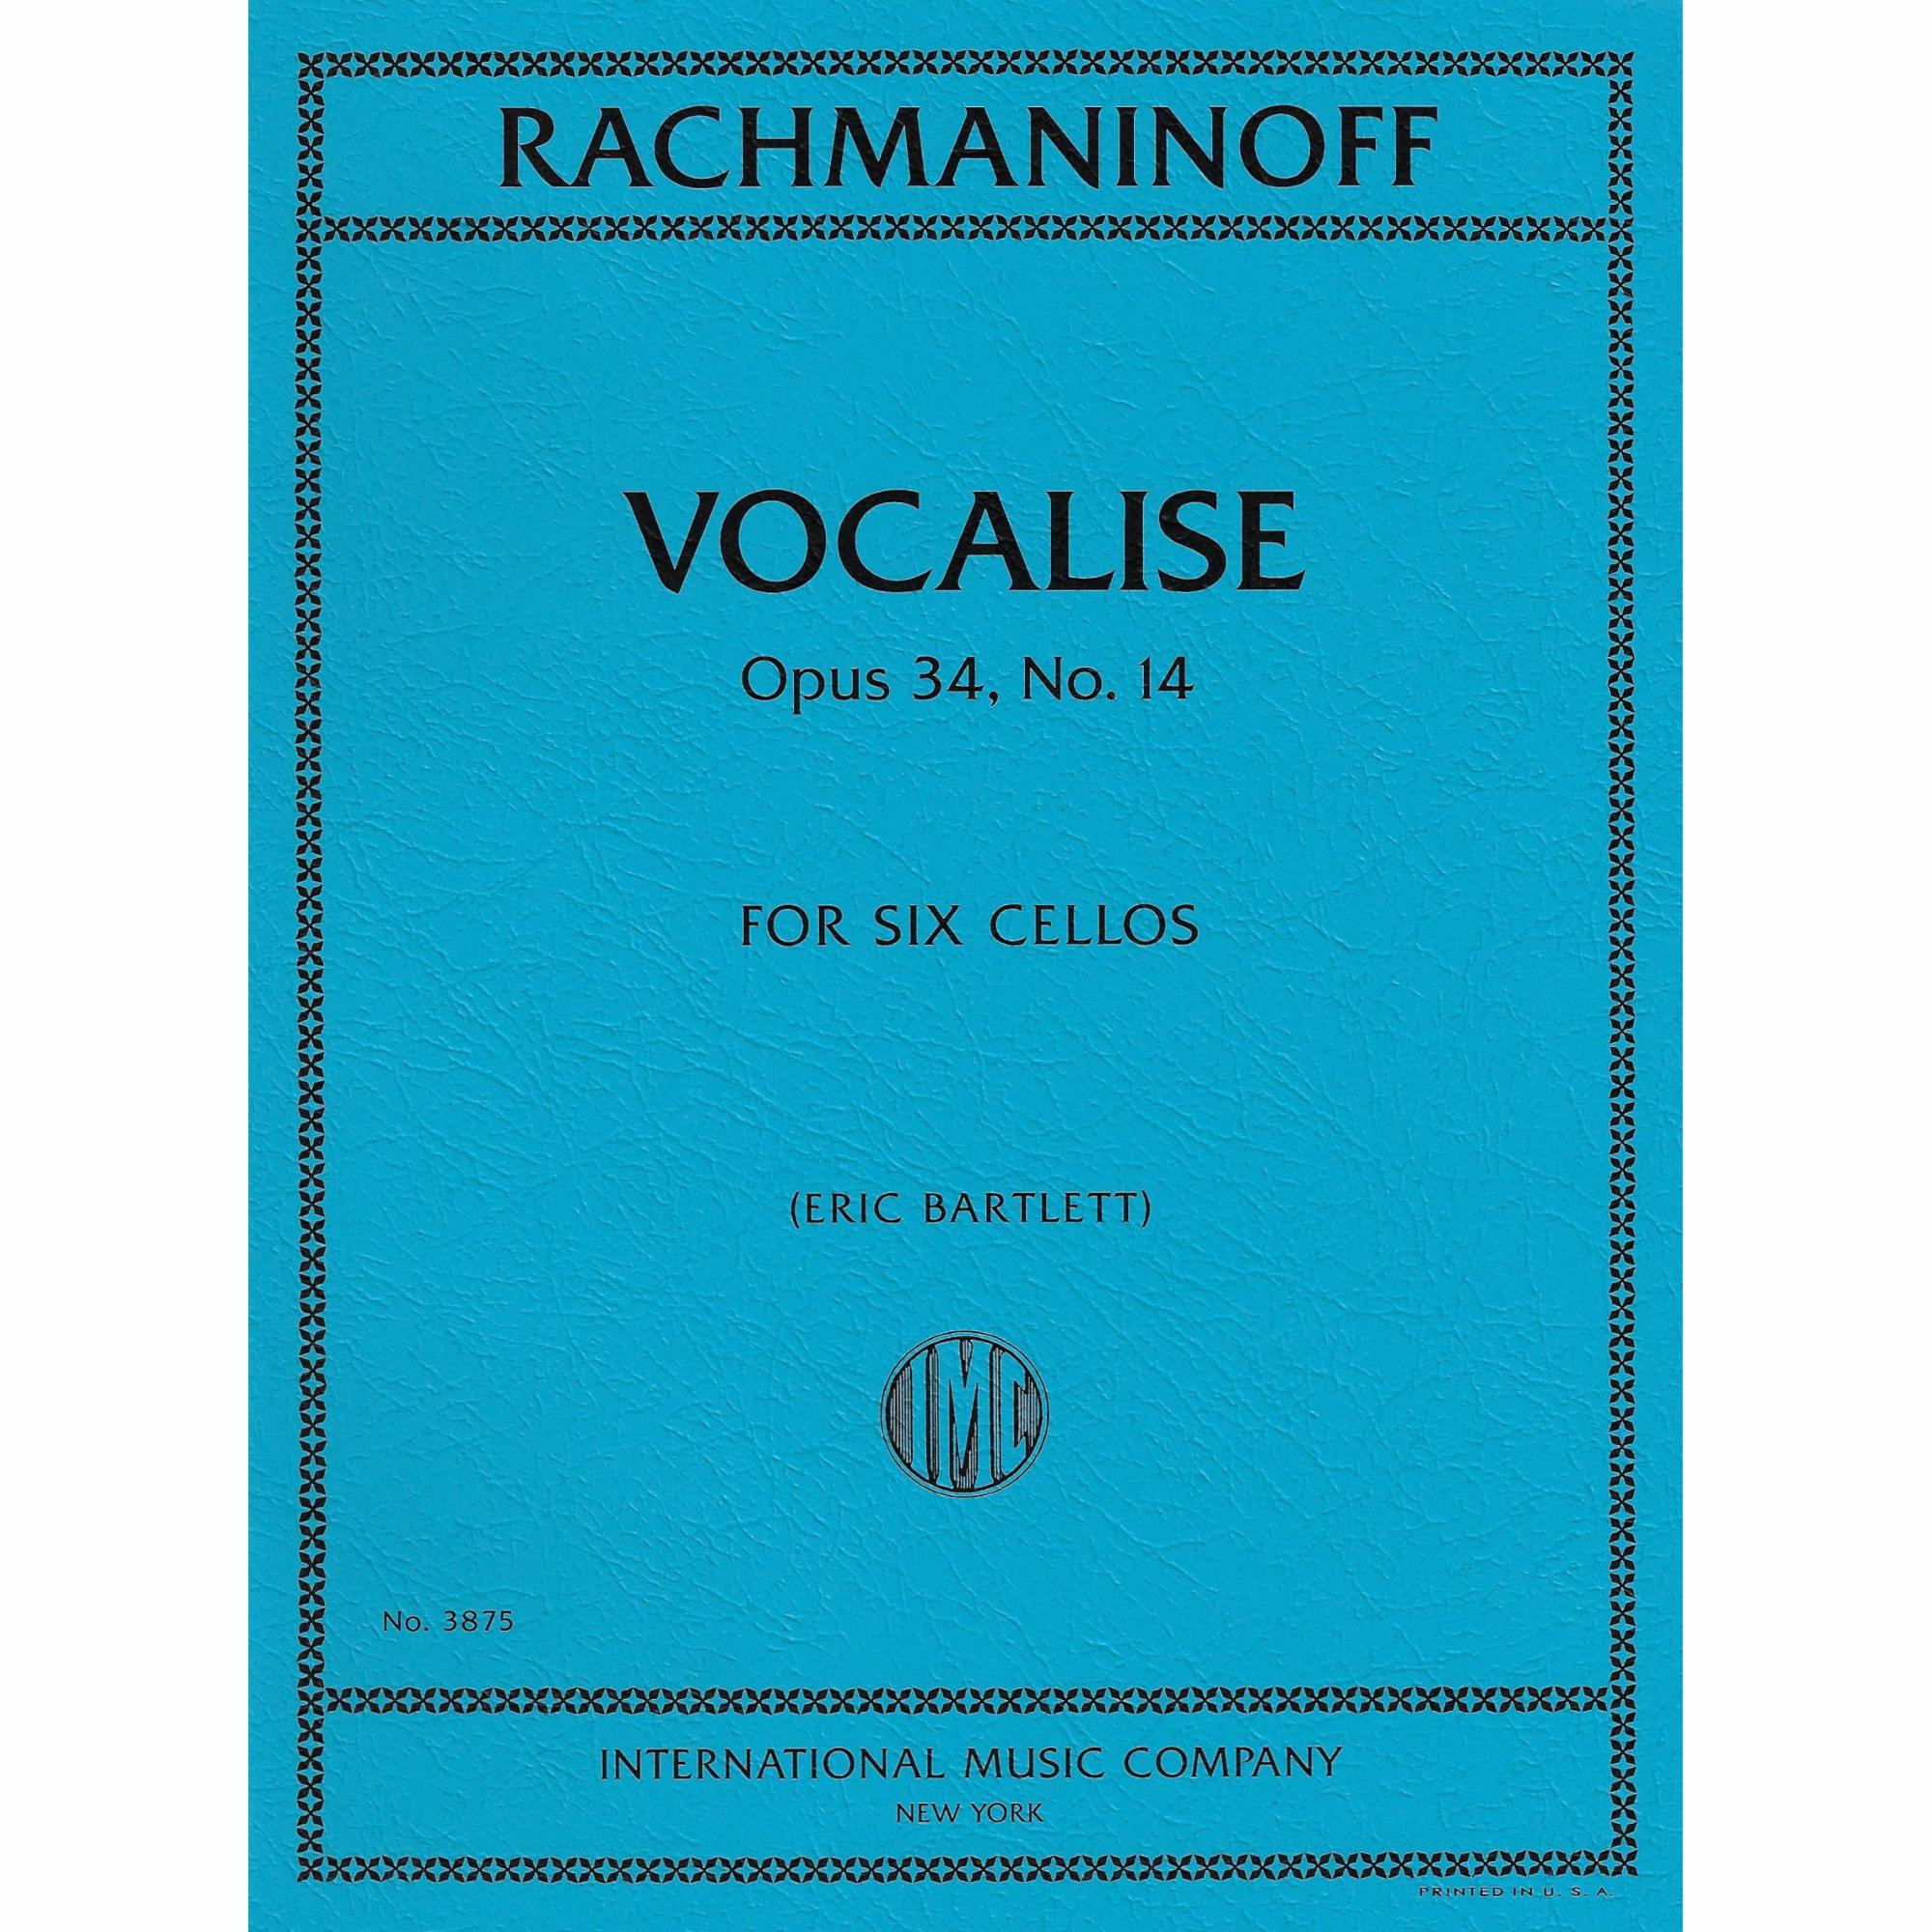 Rachmaninoff -- Vocalise, Op. 34, No. 14 for Six Cellos